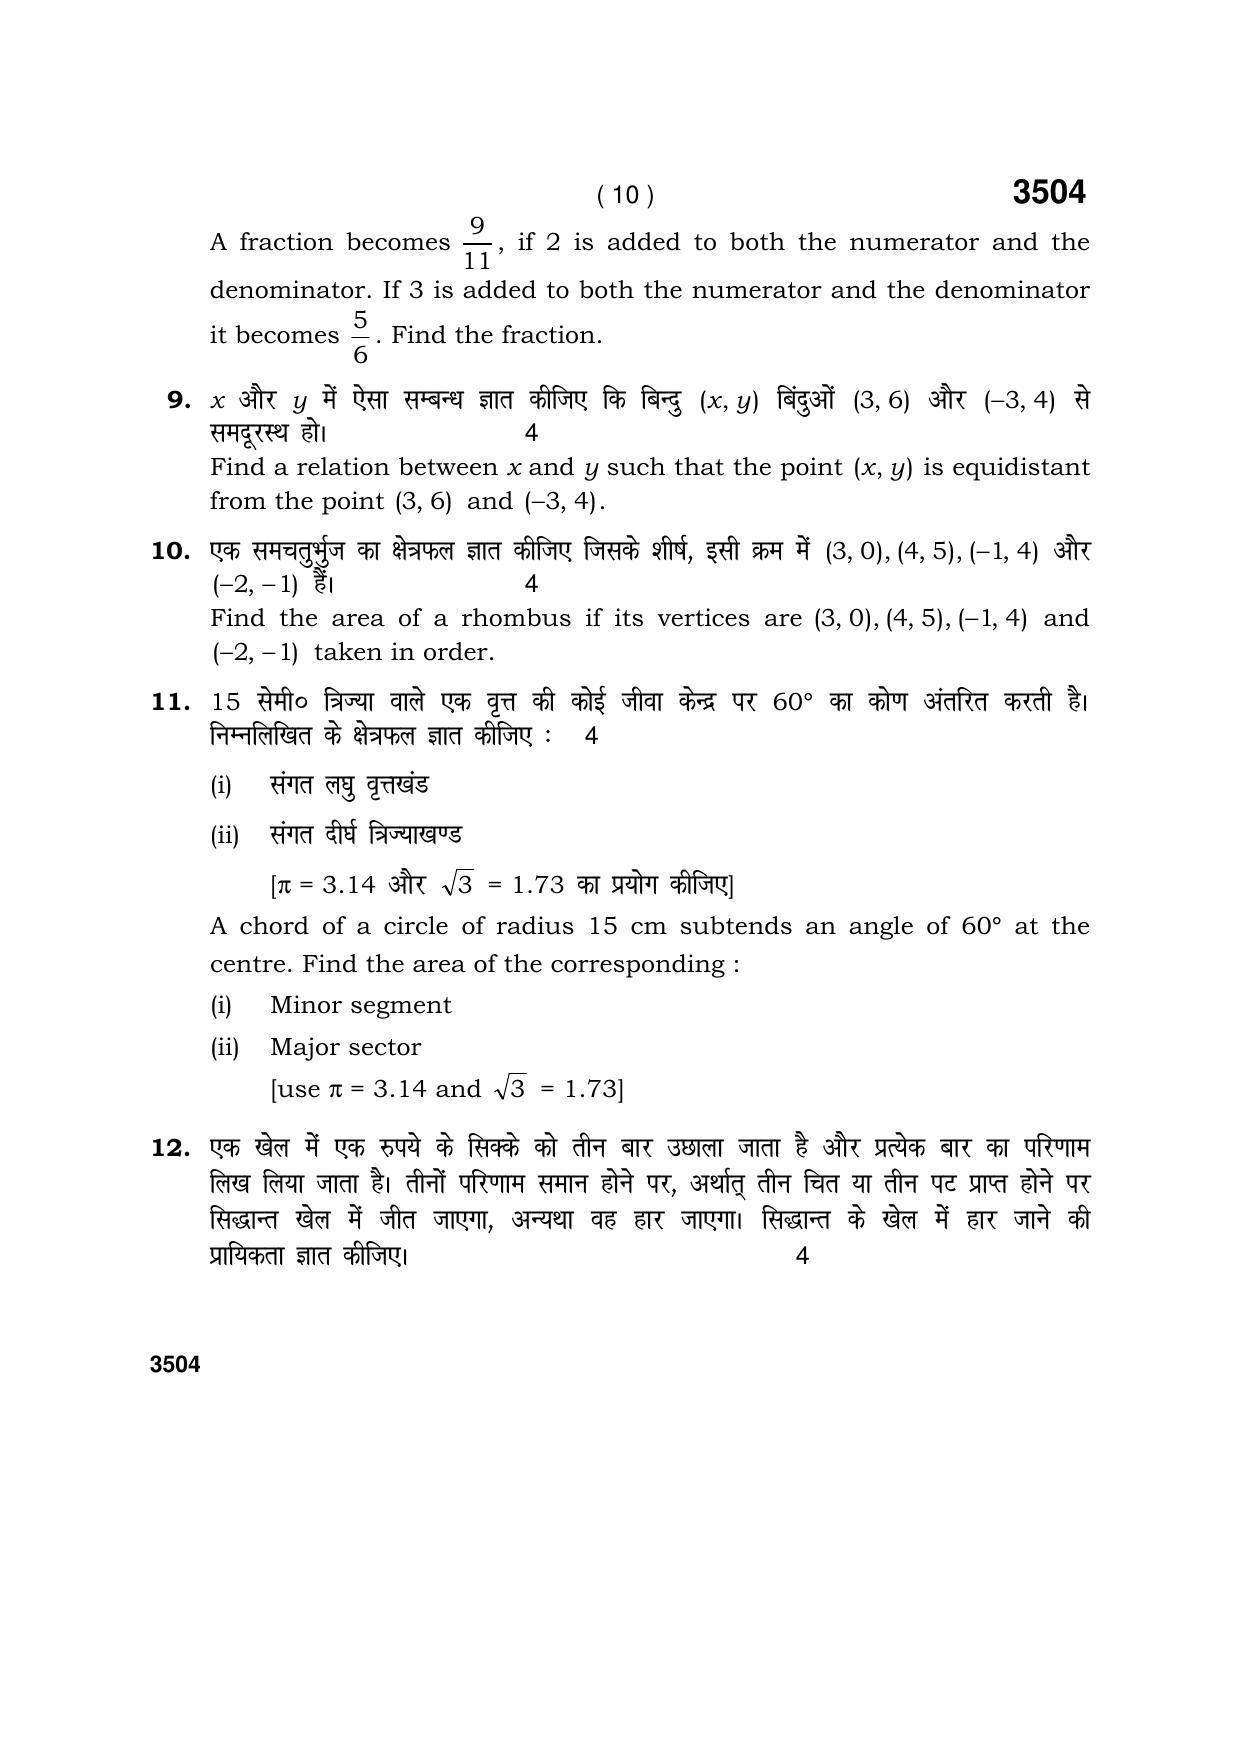 Haryana Board HBSE Class 10 Mathematics (Blind c) 2018 Question Paper - Page 10